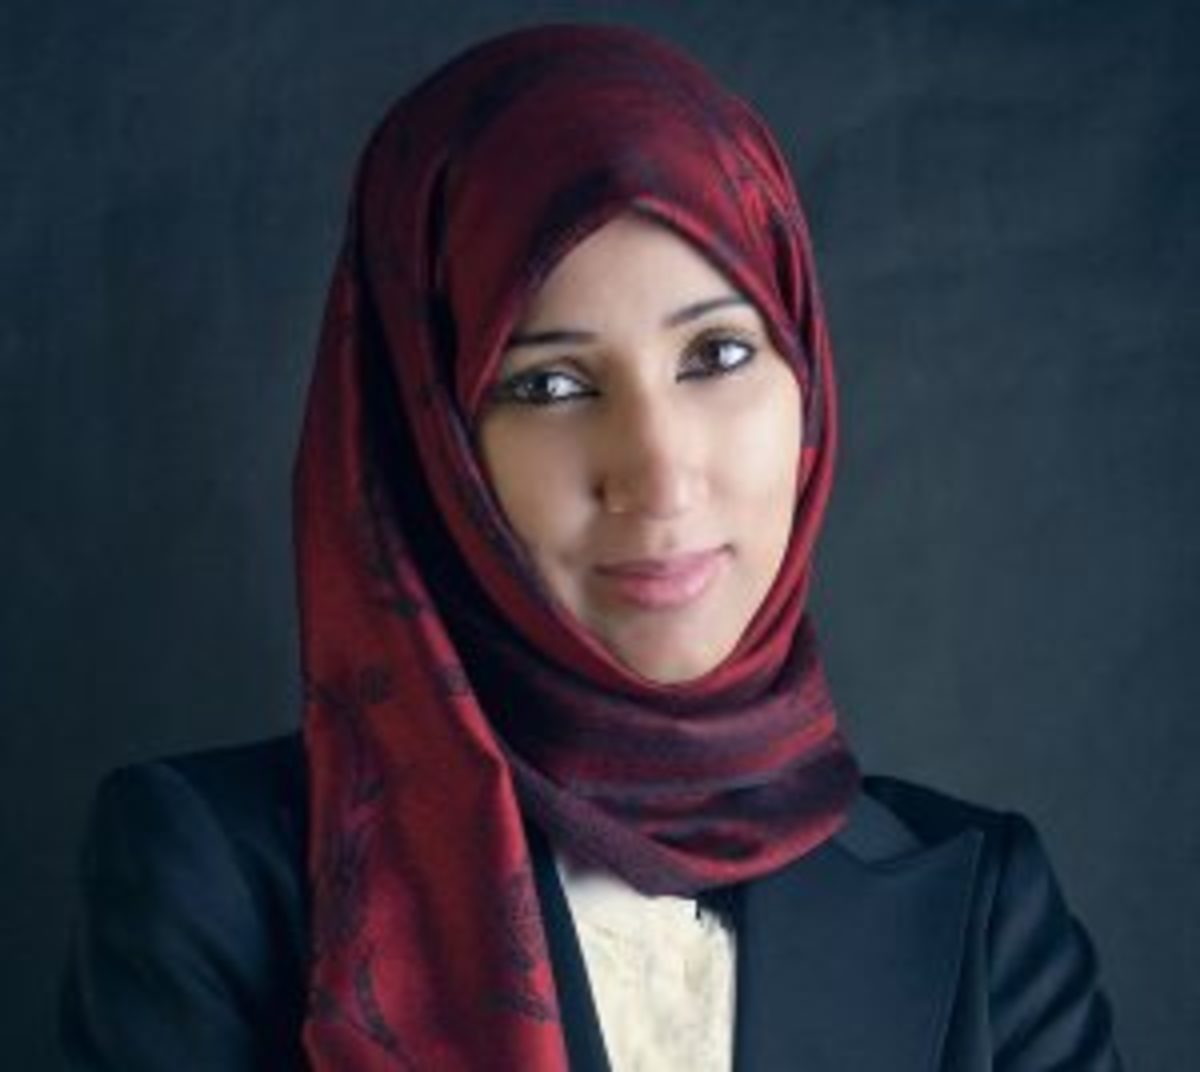 Manal-al-Sharif is a women's rights activists in Saudi Arabia.  She posted a video in 2011 of her driving: a taboo in the culture.  Though they still want respect, many Saudi women are still proud of their cultural values. by Feministcampus.org